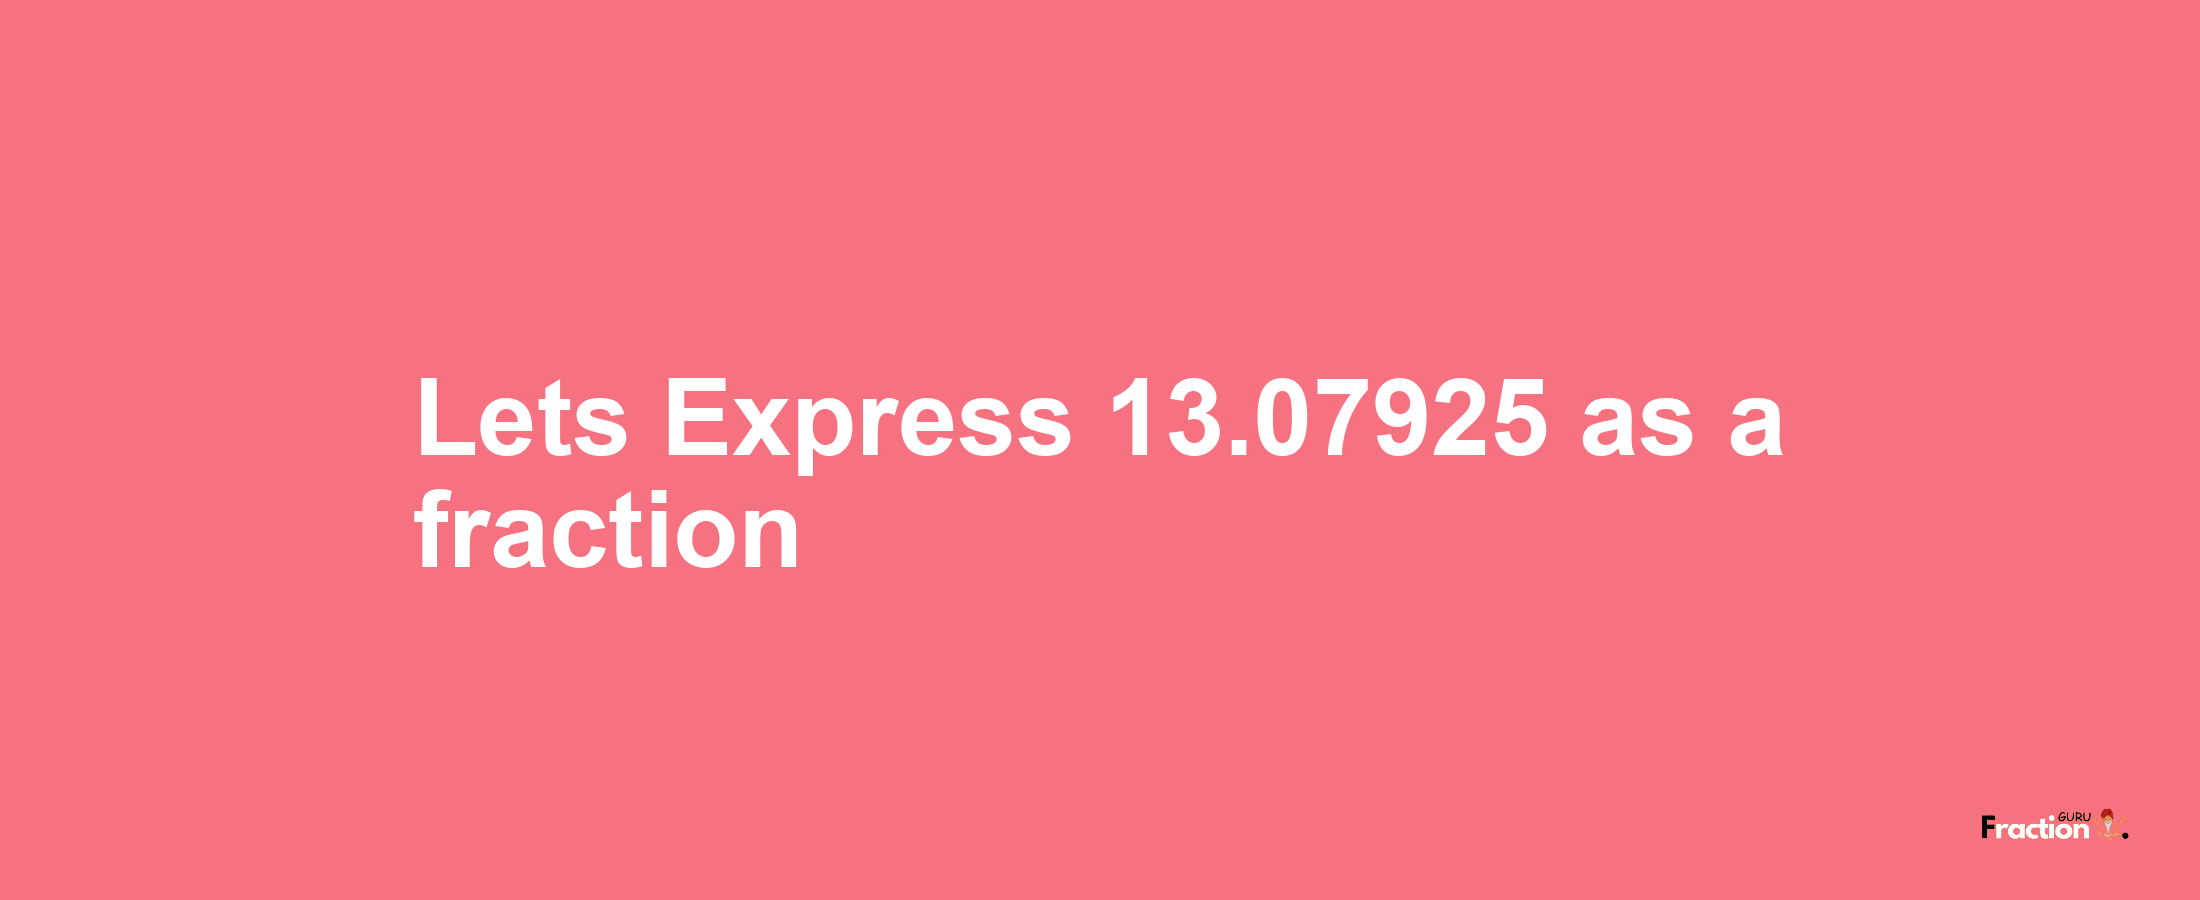 Lets Express 13.07925 as afraction